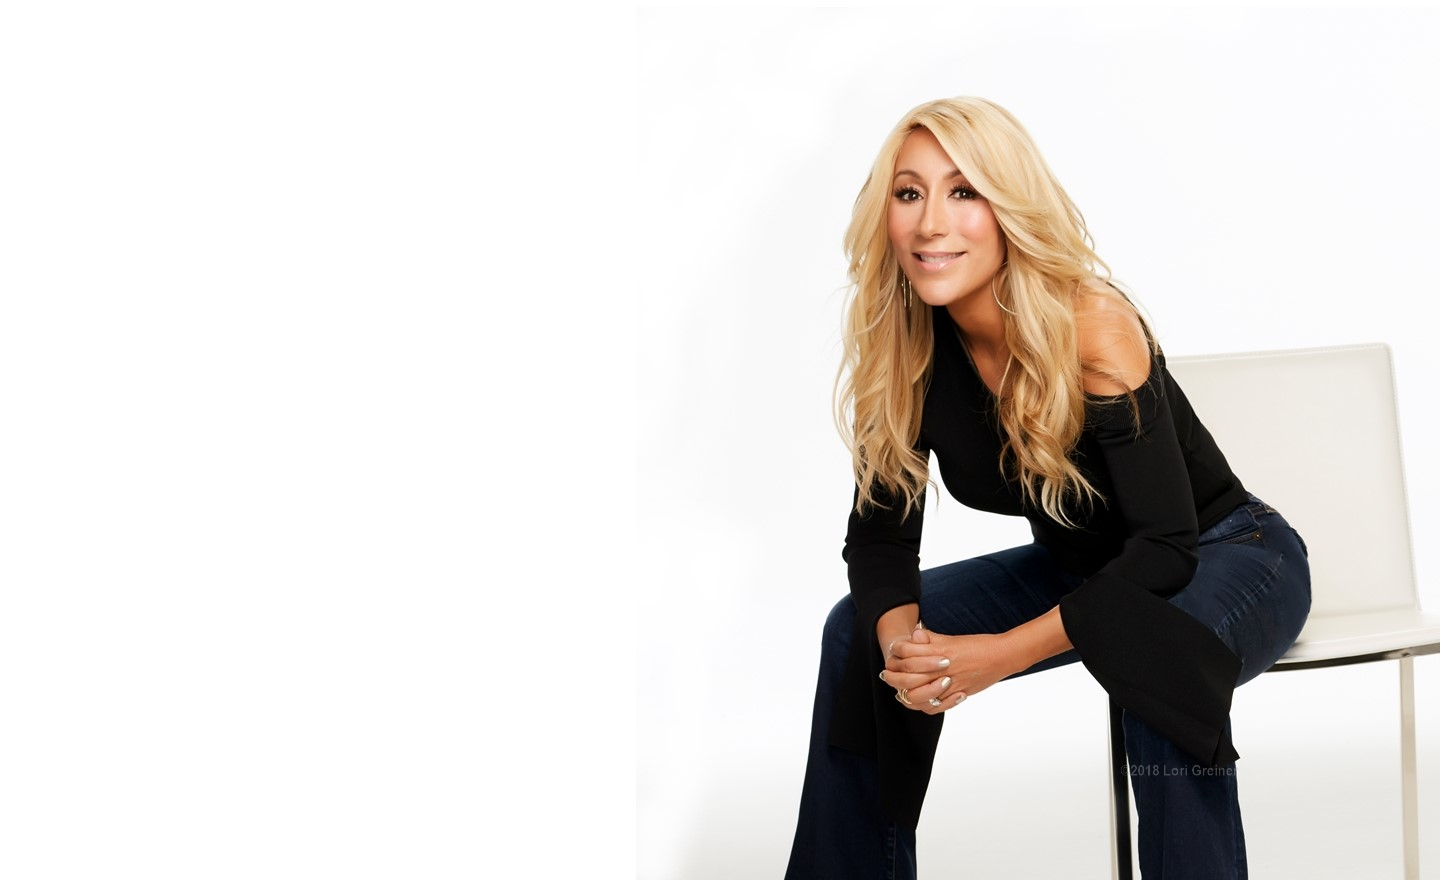 What is the net worth of Lori Greiner?